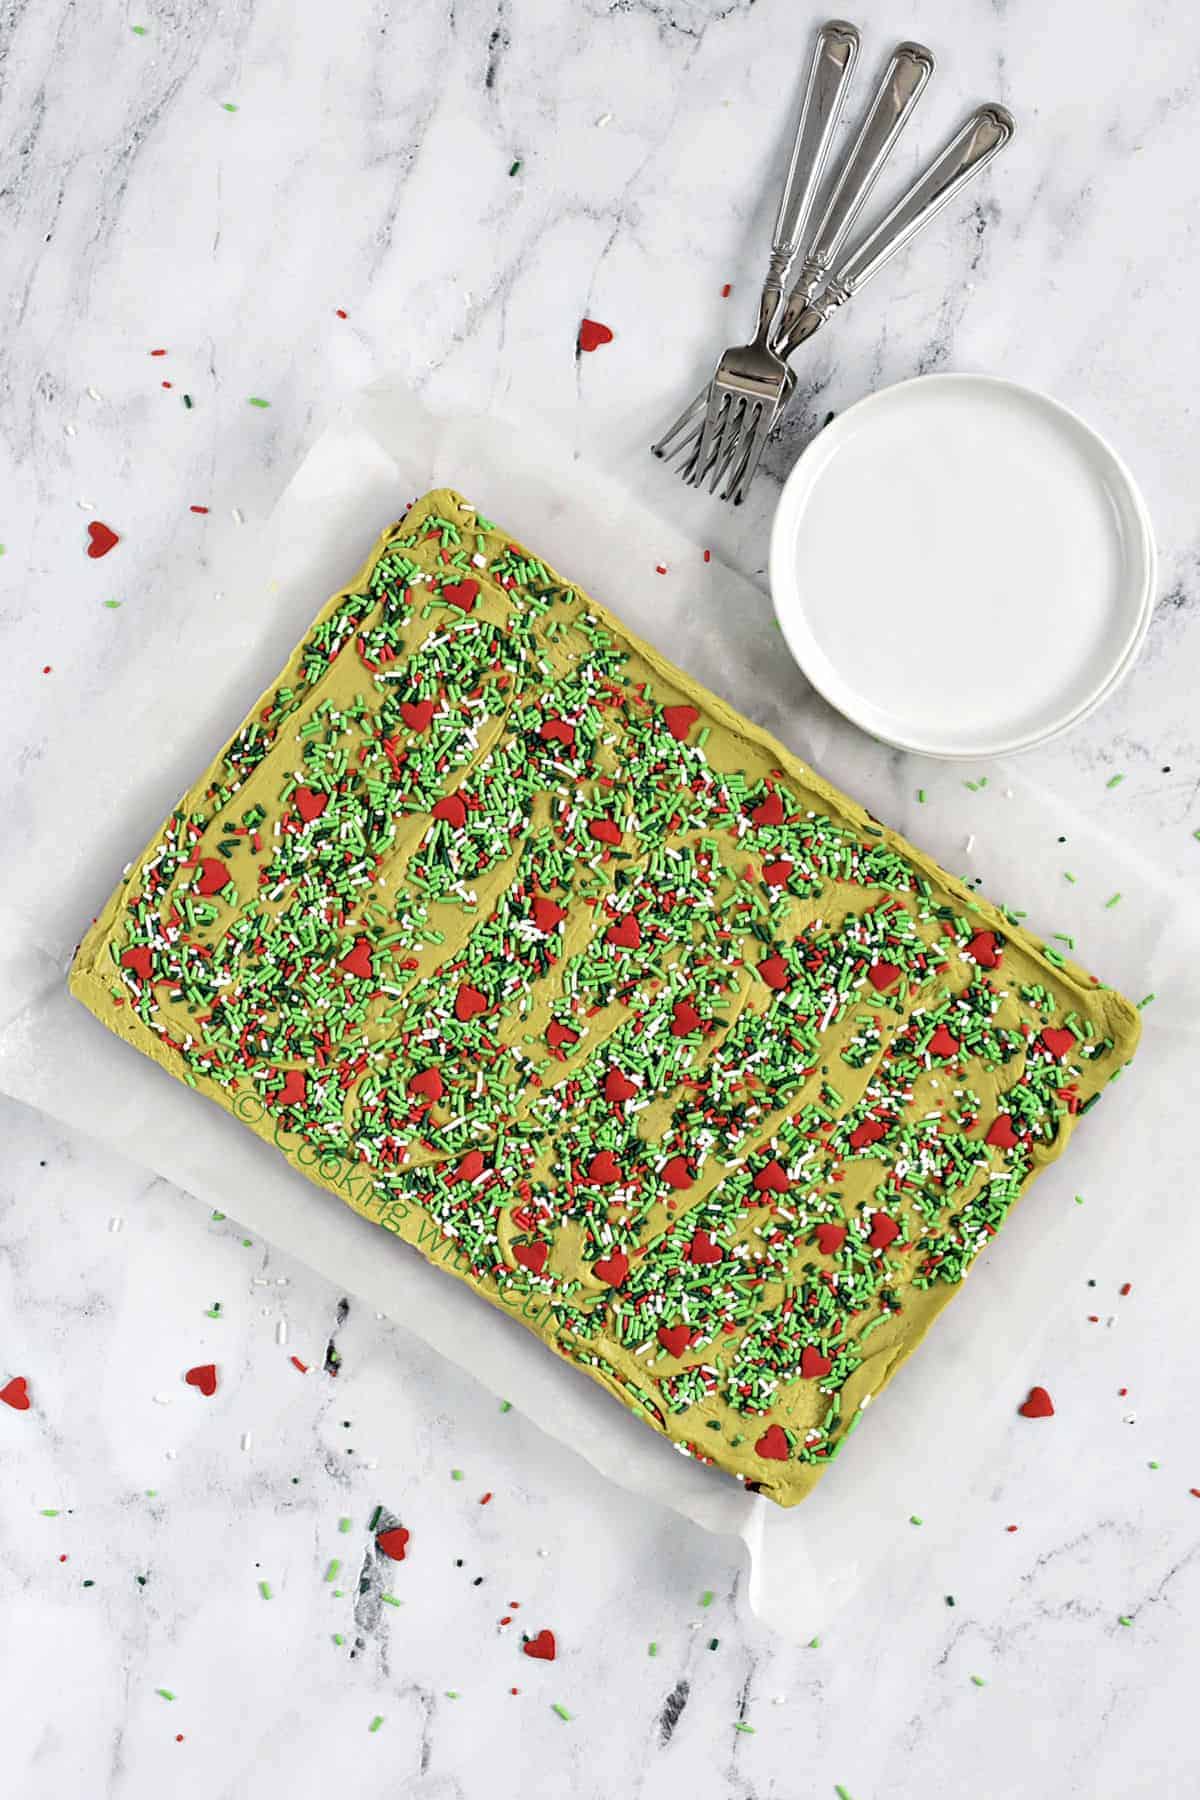 A full pan of Grinch Fudge topped Brownies with holiday sprinkles.